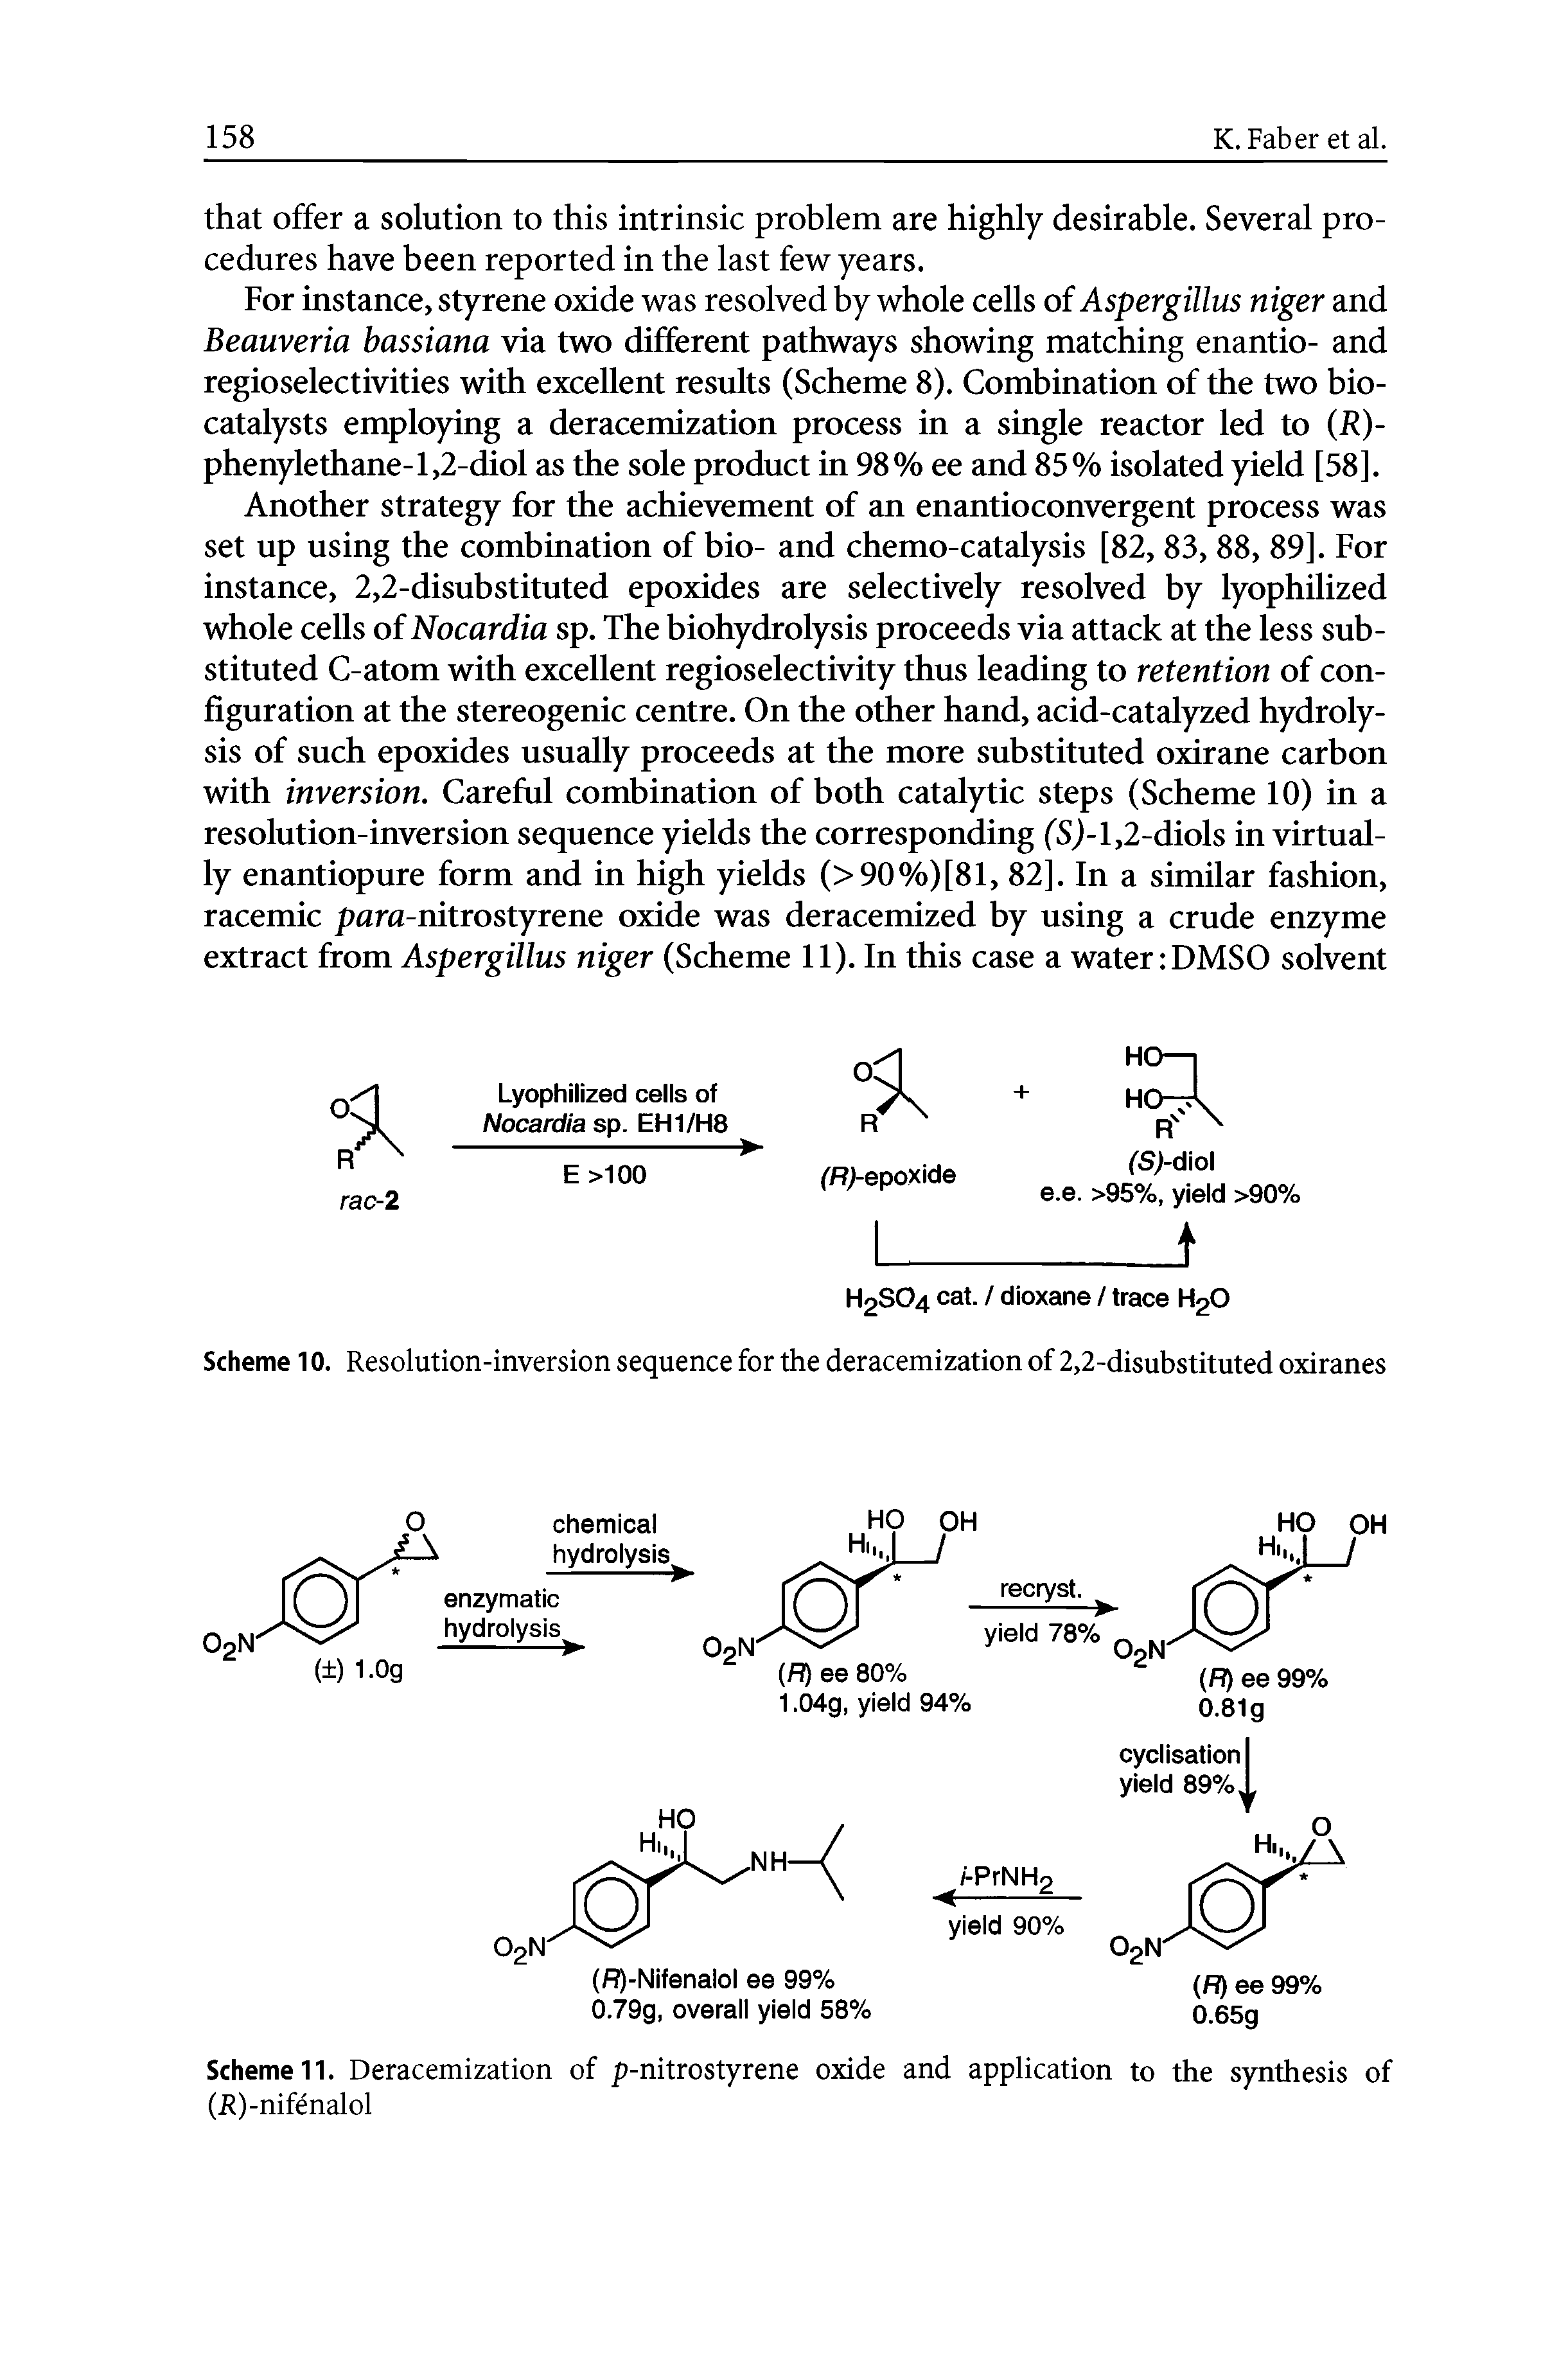 Scheme 11. Deracemization of p-nitrostyrene oxide and application to the synthesis of (R)-nifenalol...